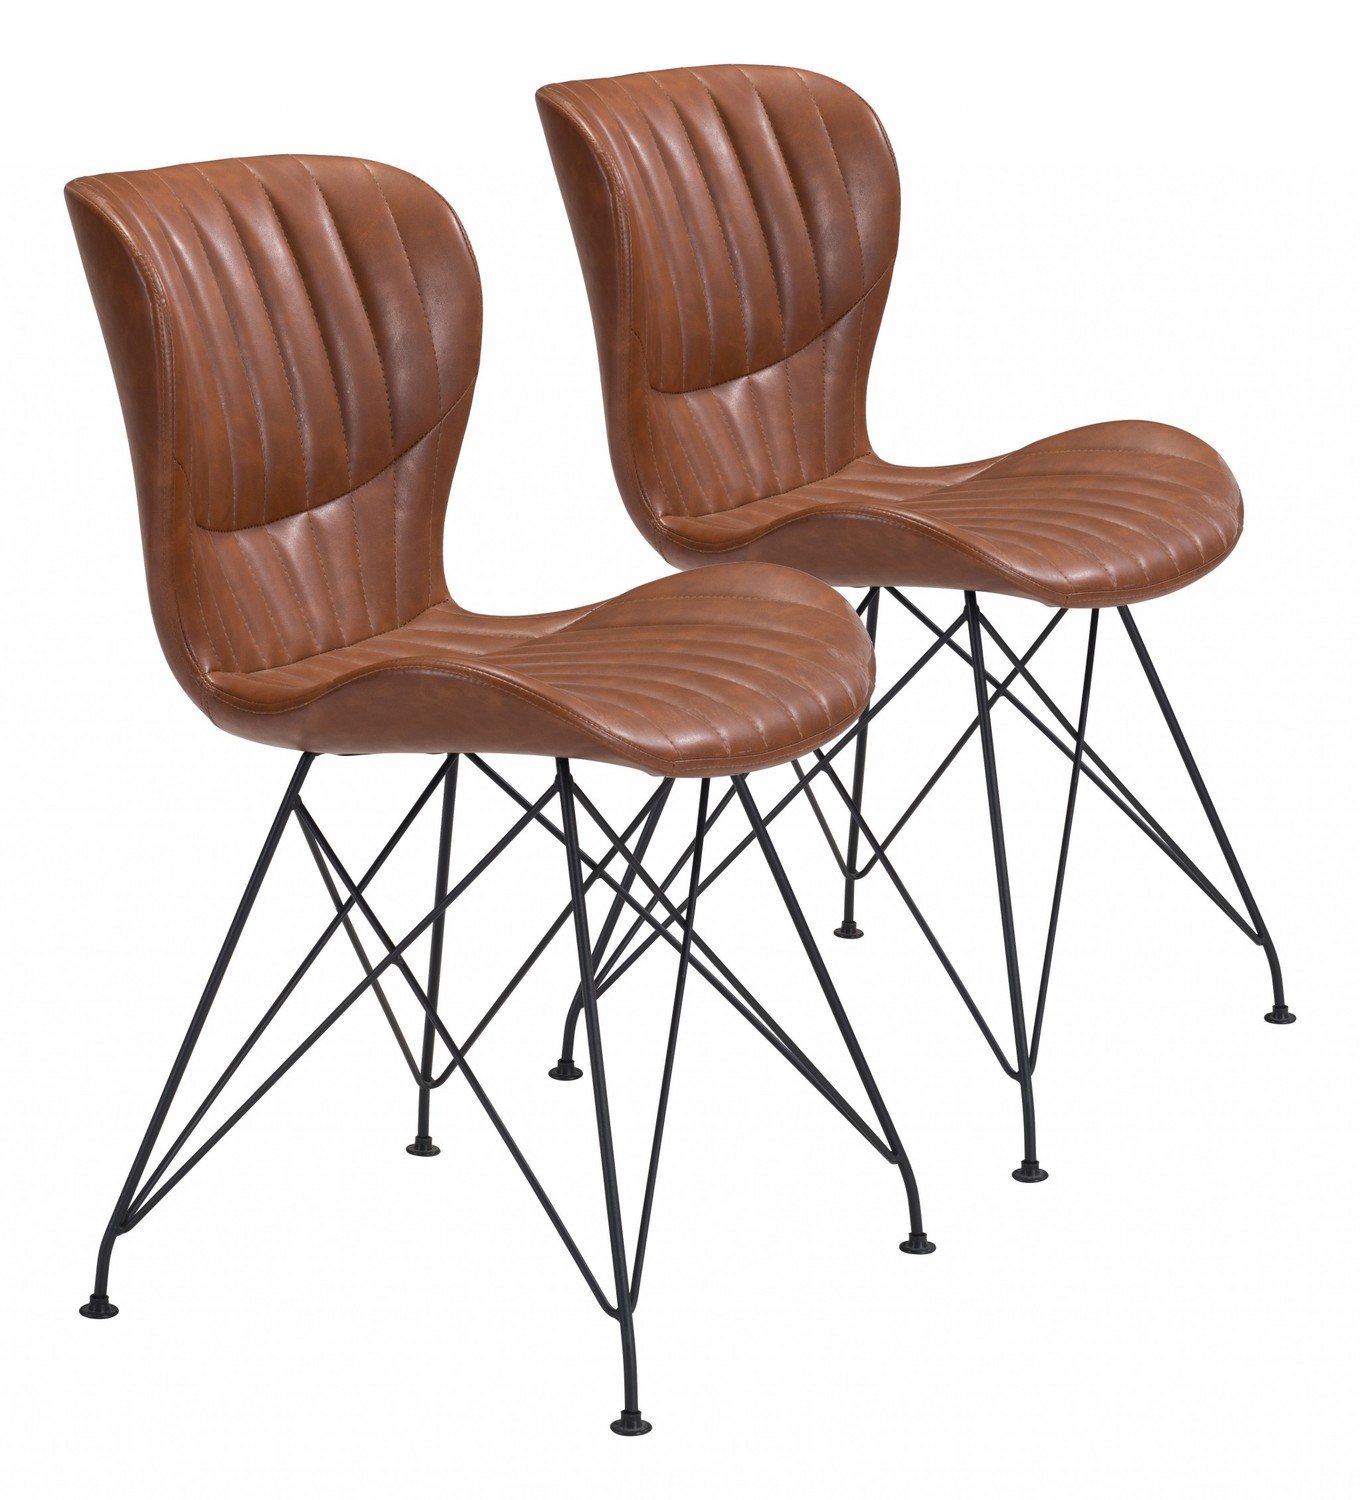 Set of Two Brown Faux Leather Boho Chip Dining Chair